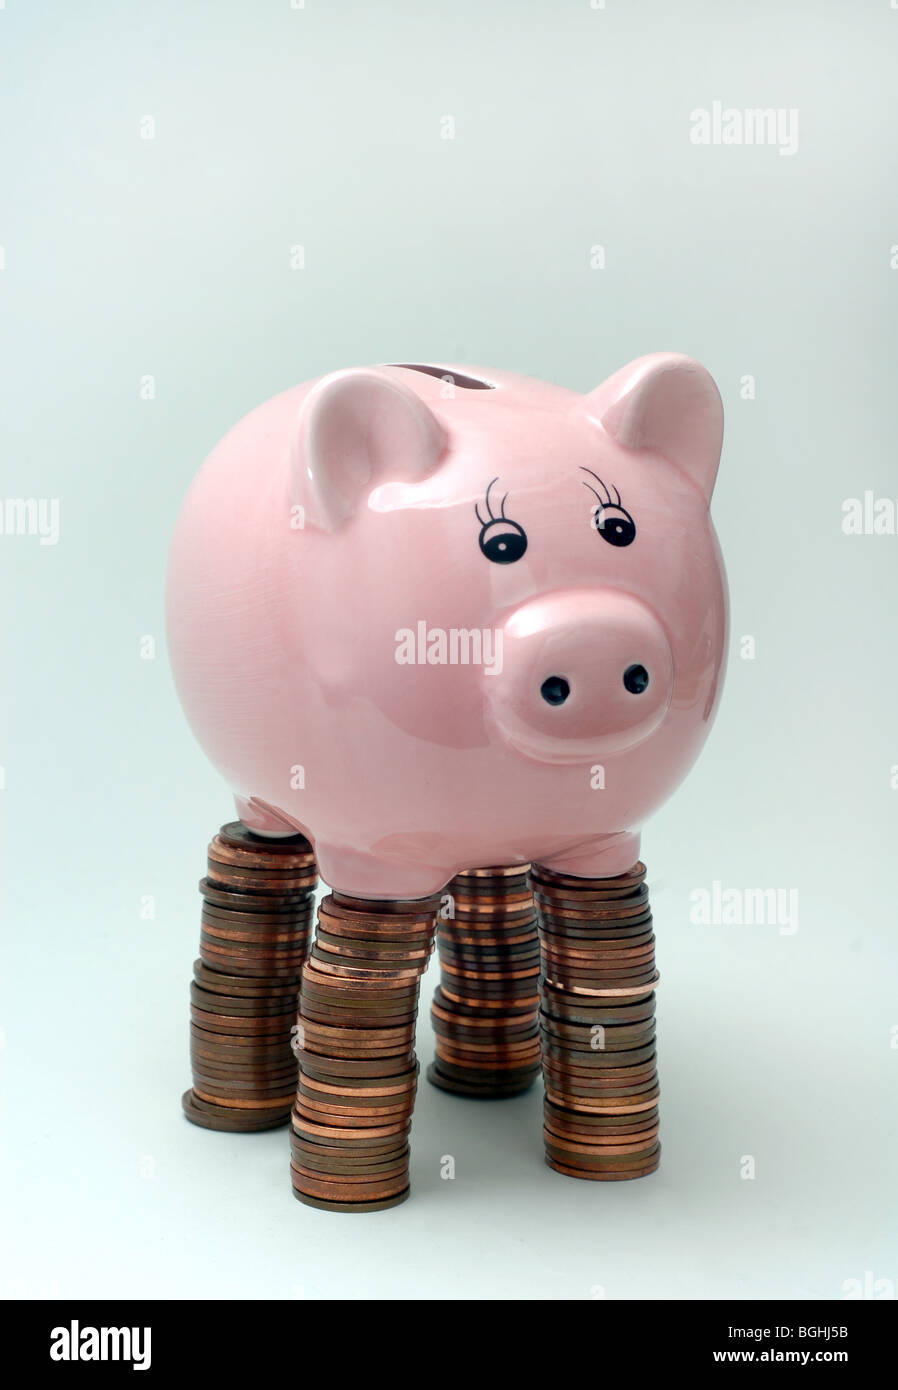 PIGGYBANK,PIGGYBANKS STANDING ON PILES OF BRITISH COINS RE THE ECONOMY SAVINGS INCOMES THE RECESSION BANKS CASH WAGES UK Stock Photo